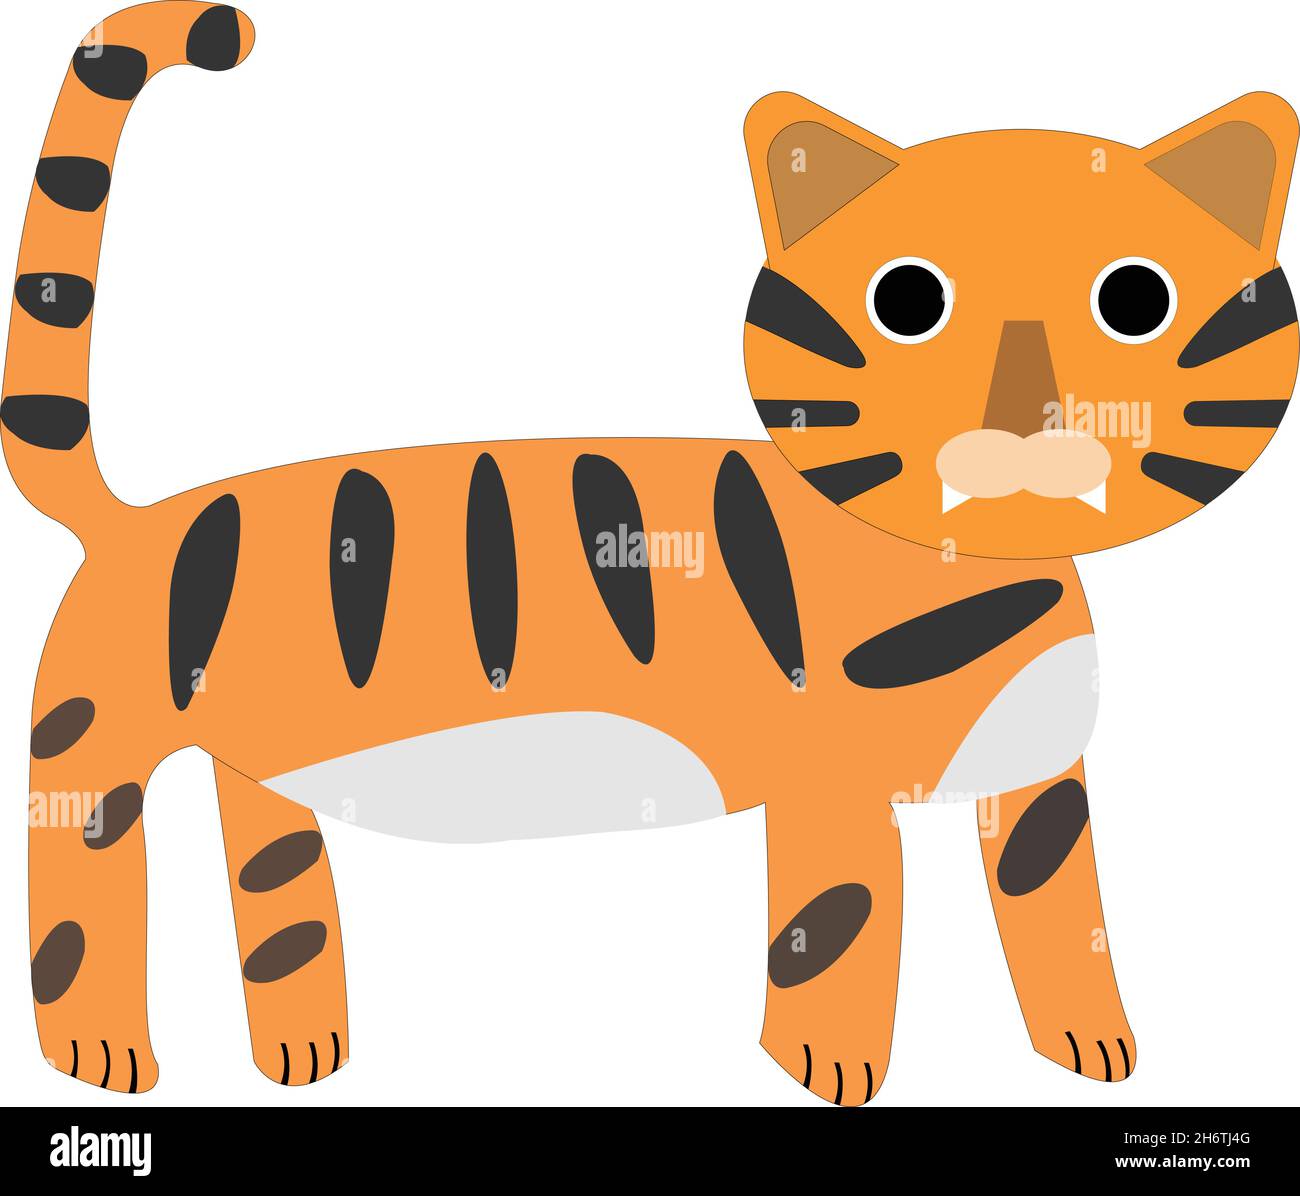 It is a character design with a baby tiger standing. It can be used as decoration for cards, letters, posters, cartoons, etc. Stock Vector